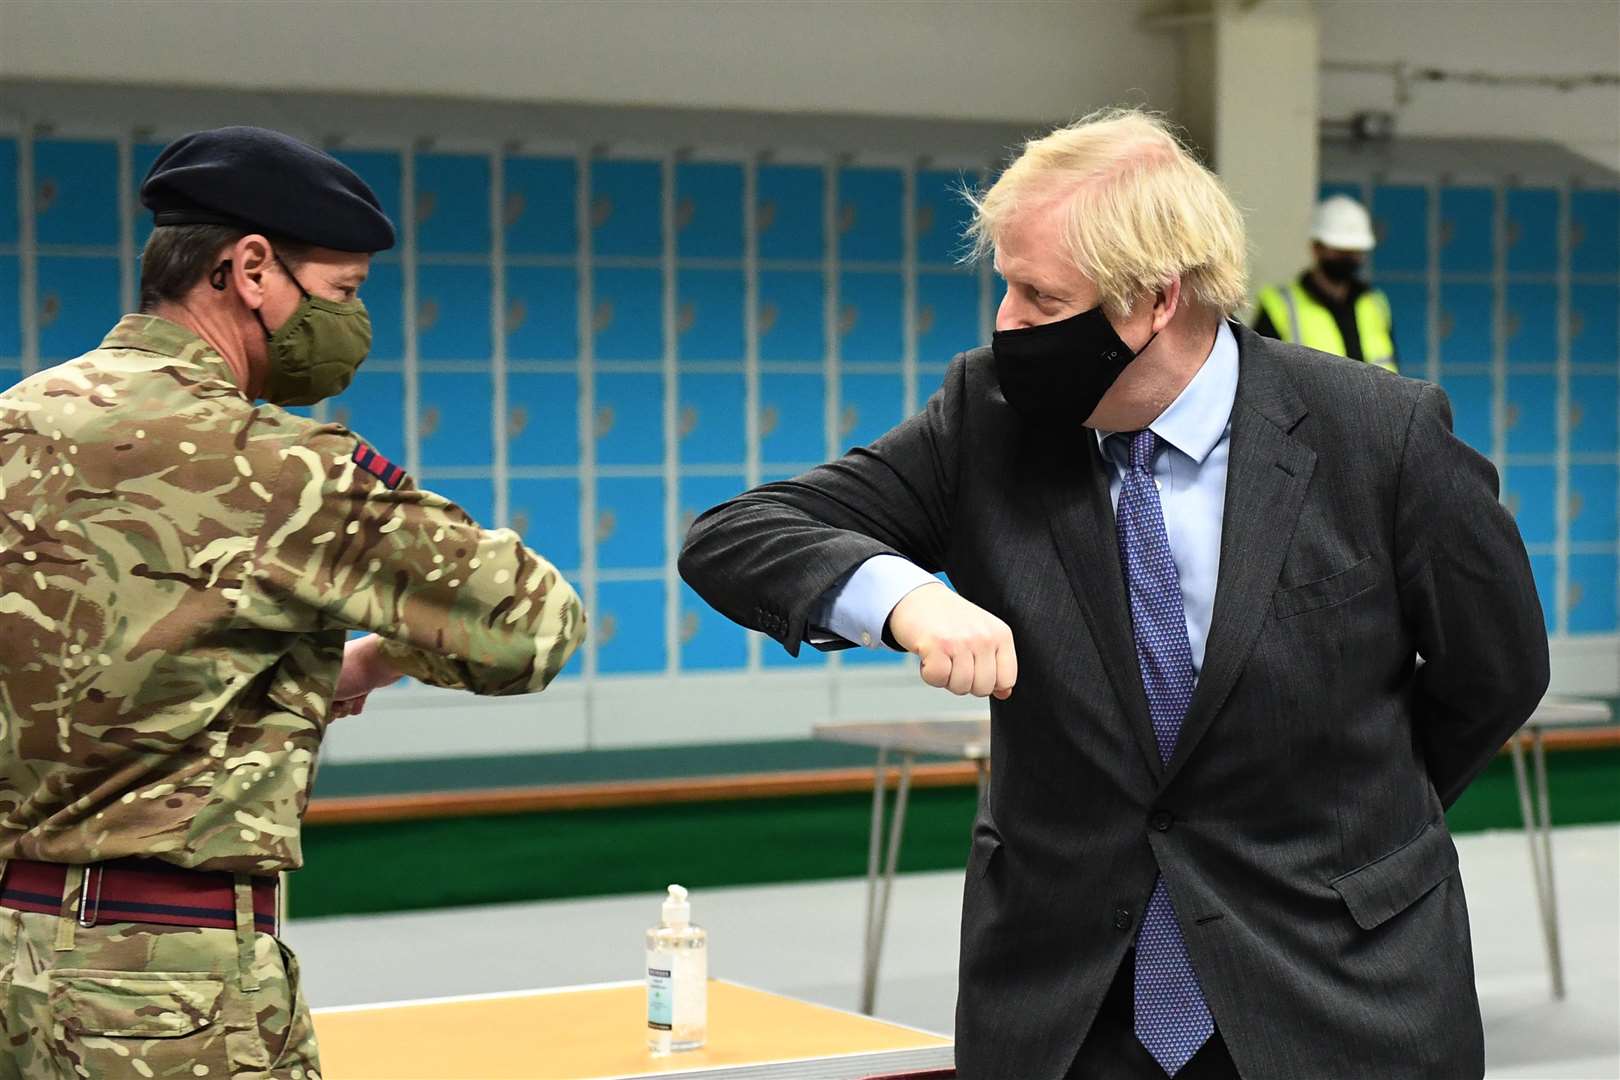 Prime Minister Boris Johnson elbow-bumps a member of the military at a vaccination centre in the Castlemilk district of Glasgow (Jeff Mitchell/PA)